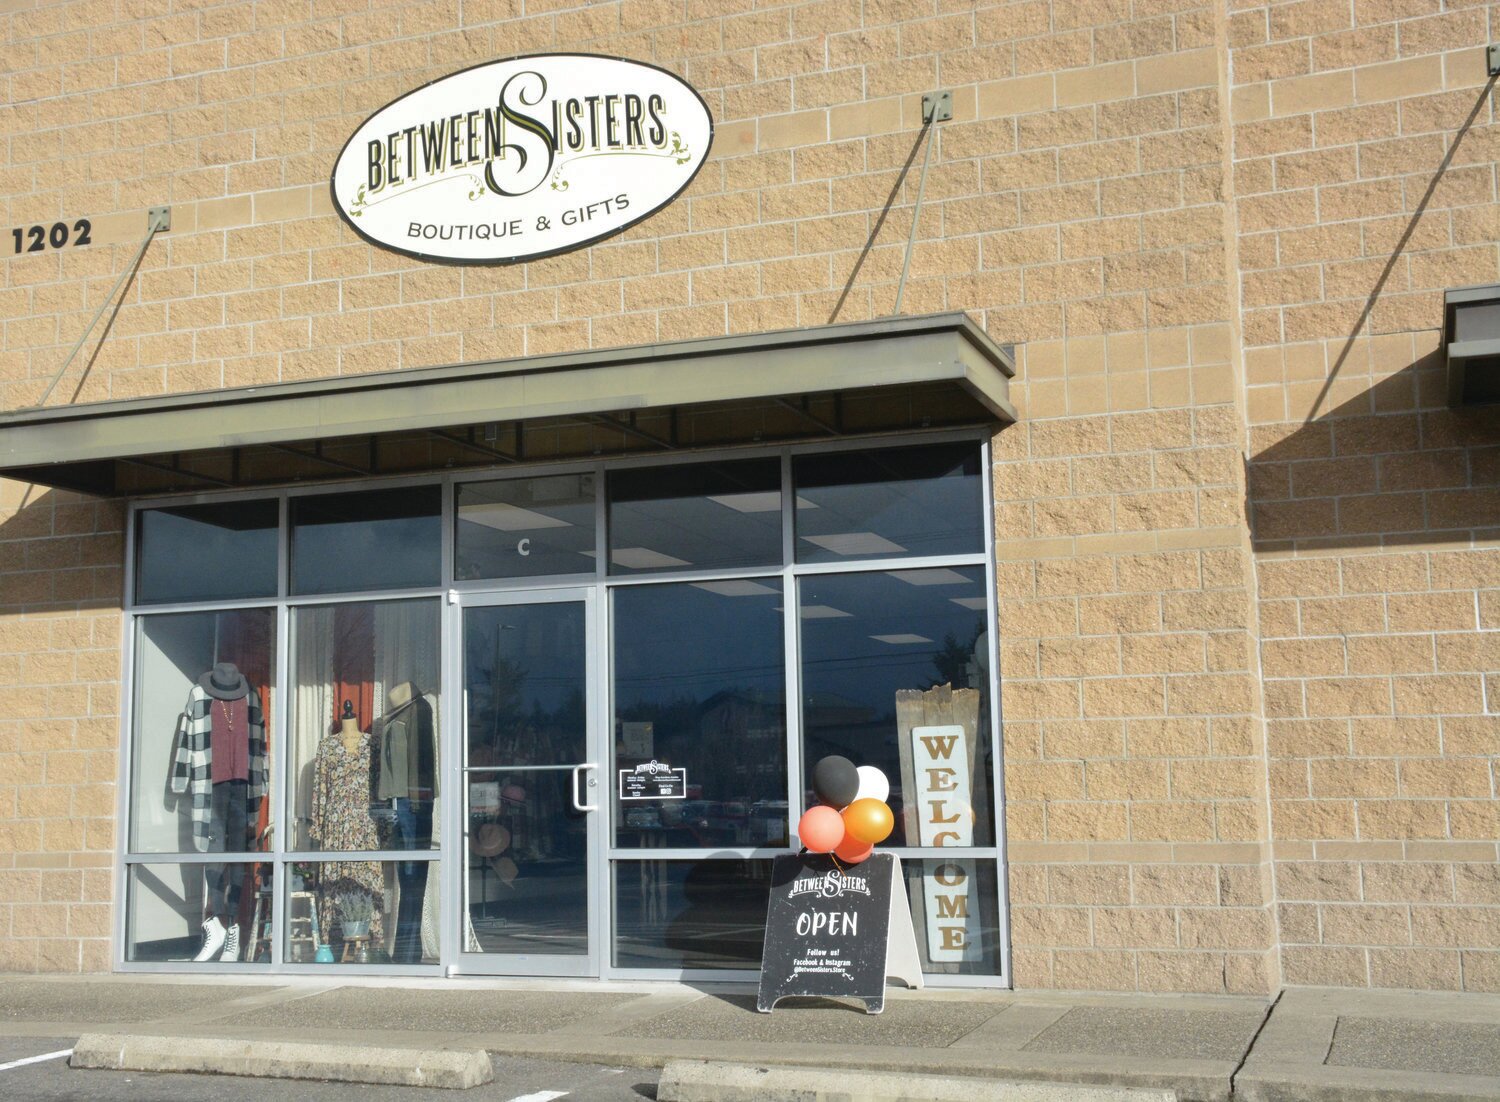 Between Sisters Boutique is located at 1202 E. Yelm Ave, Suite C, in the Dairy Queen plaza.